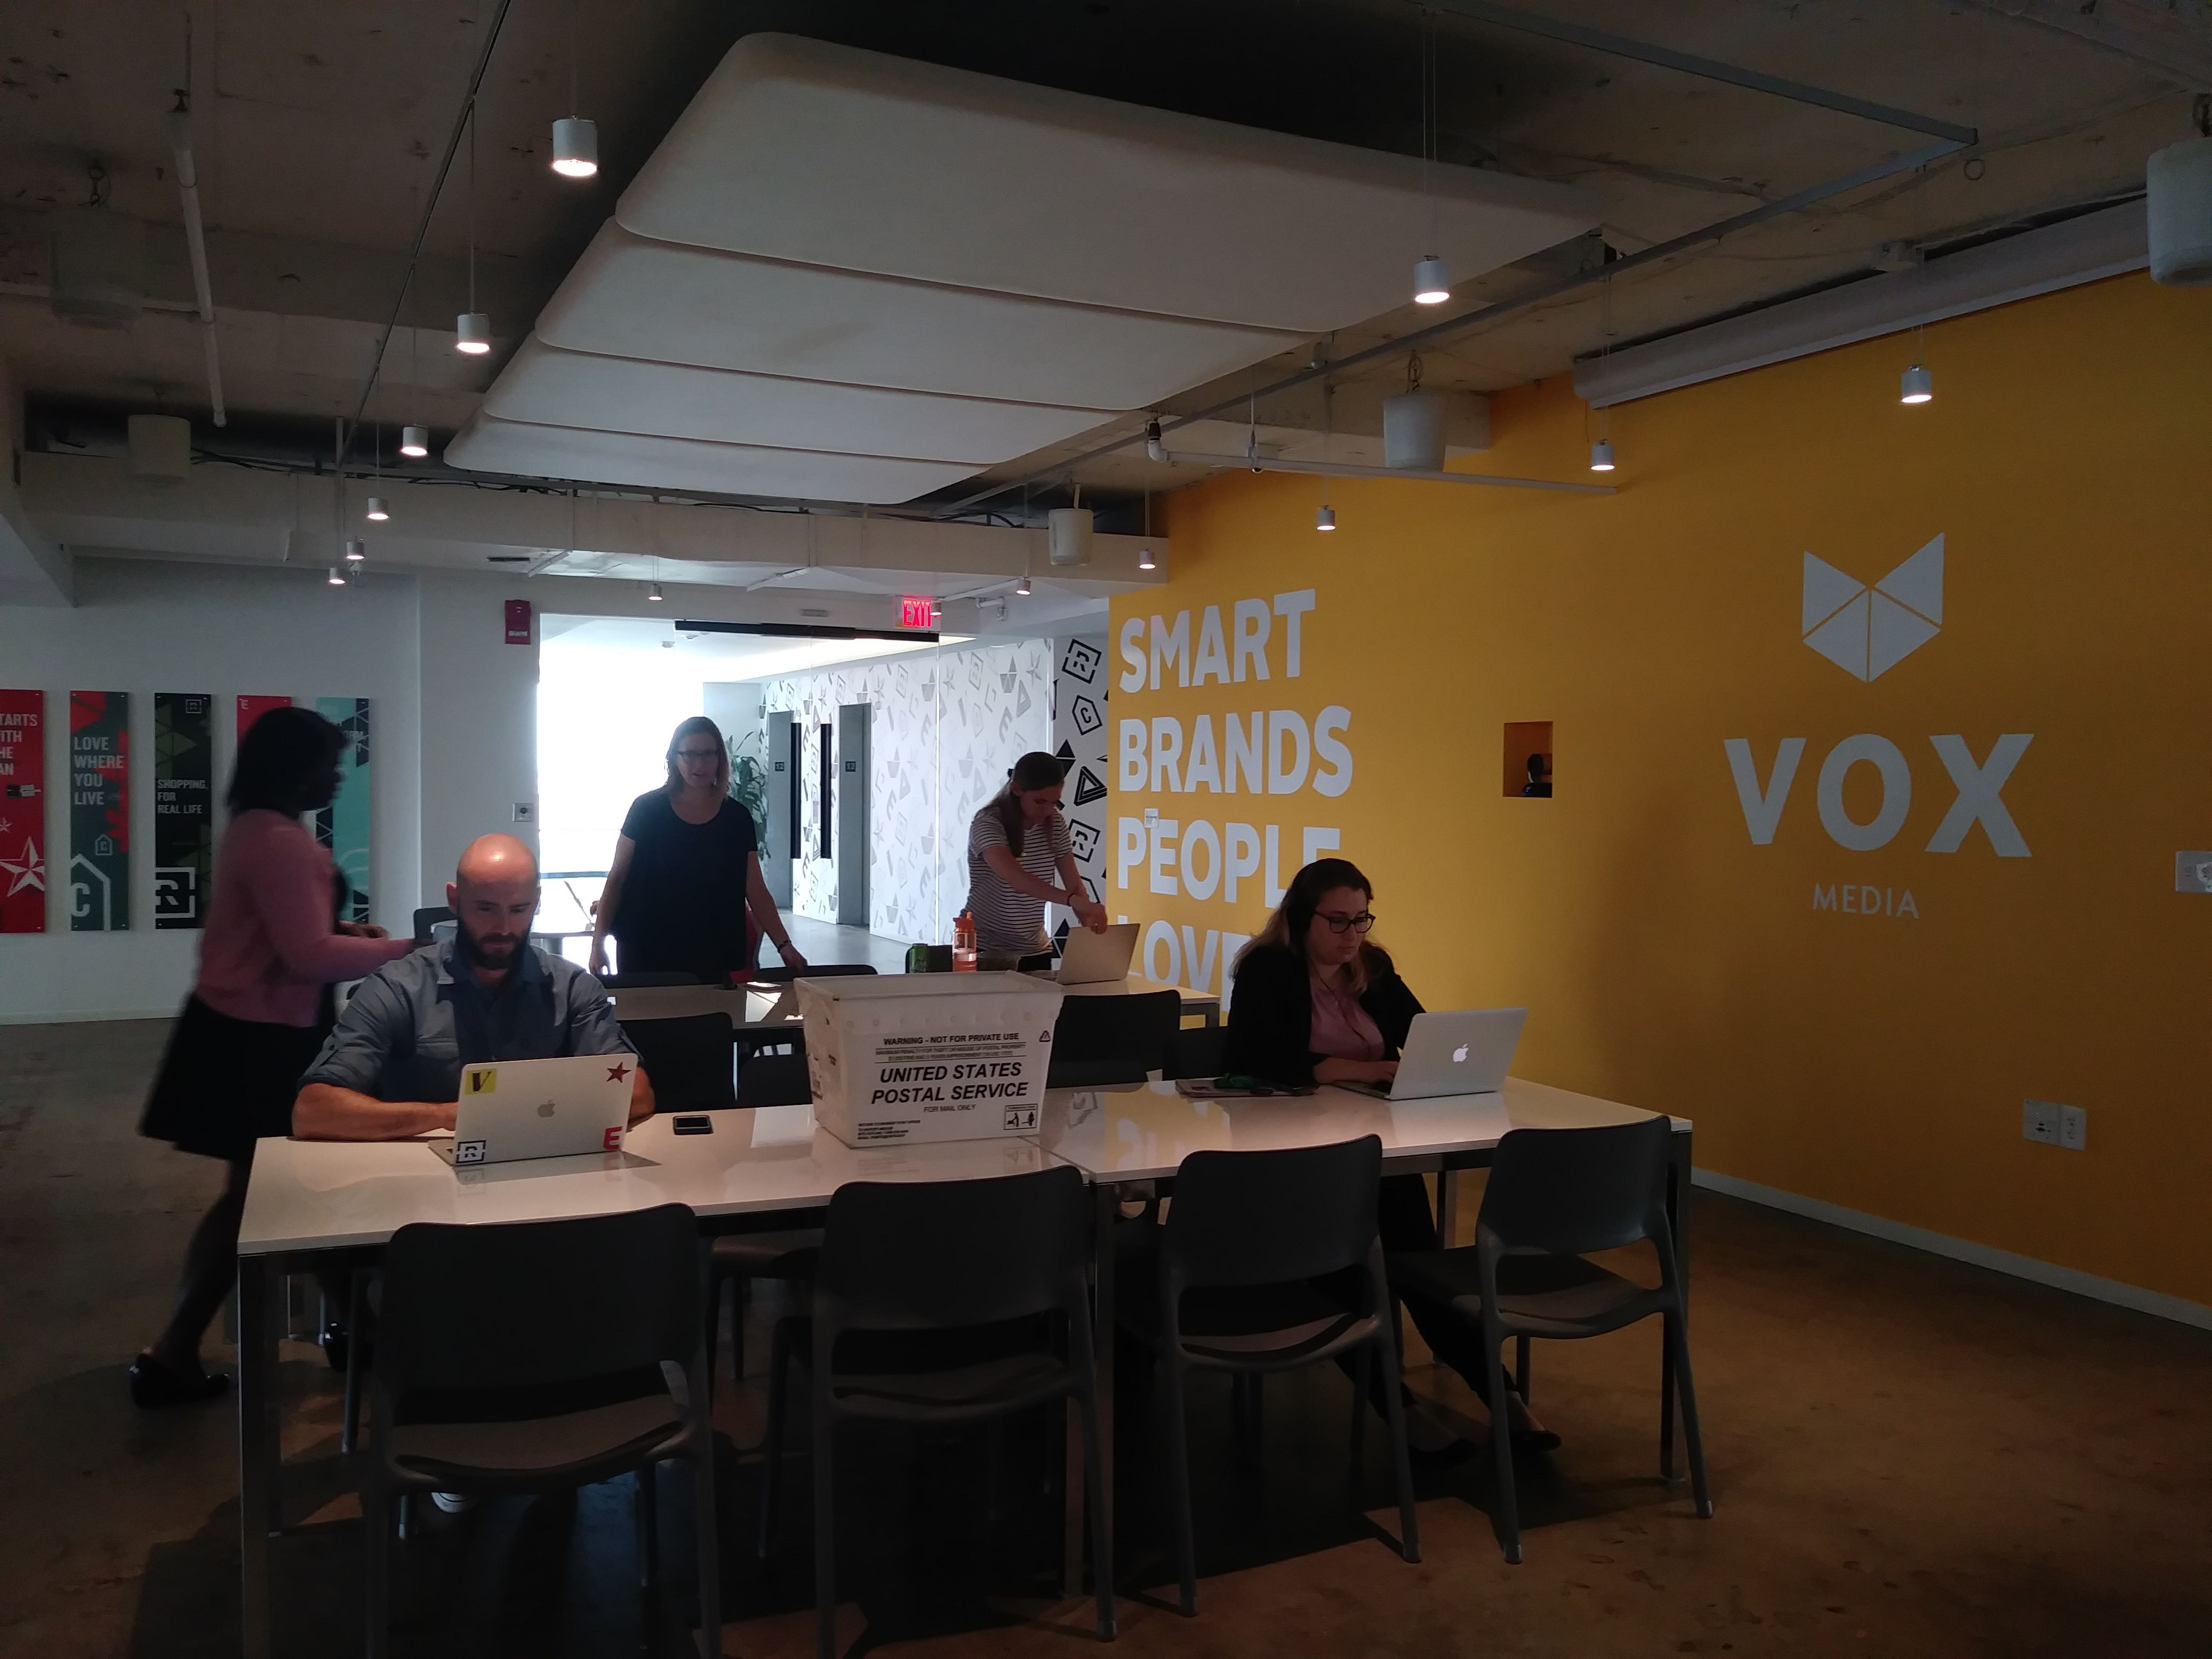 Student fellows visit Vox to learn about health reporting and working in teams to create multimedia projects. Image by Flaviana Sandoval. Washington, D.C., 2018.